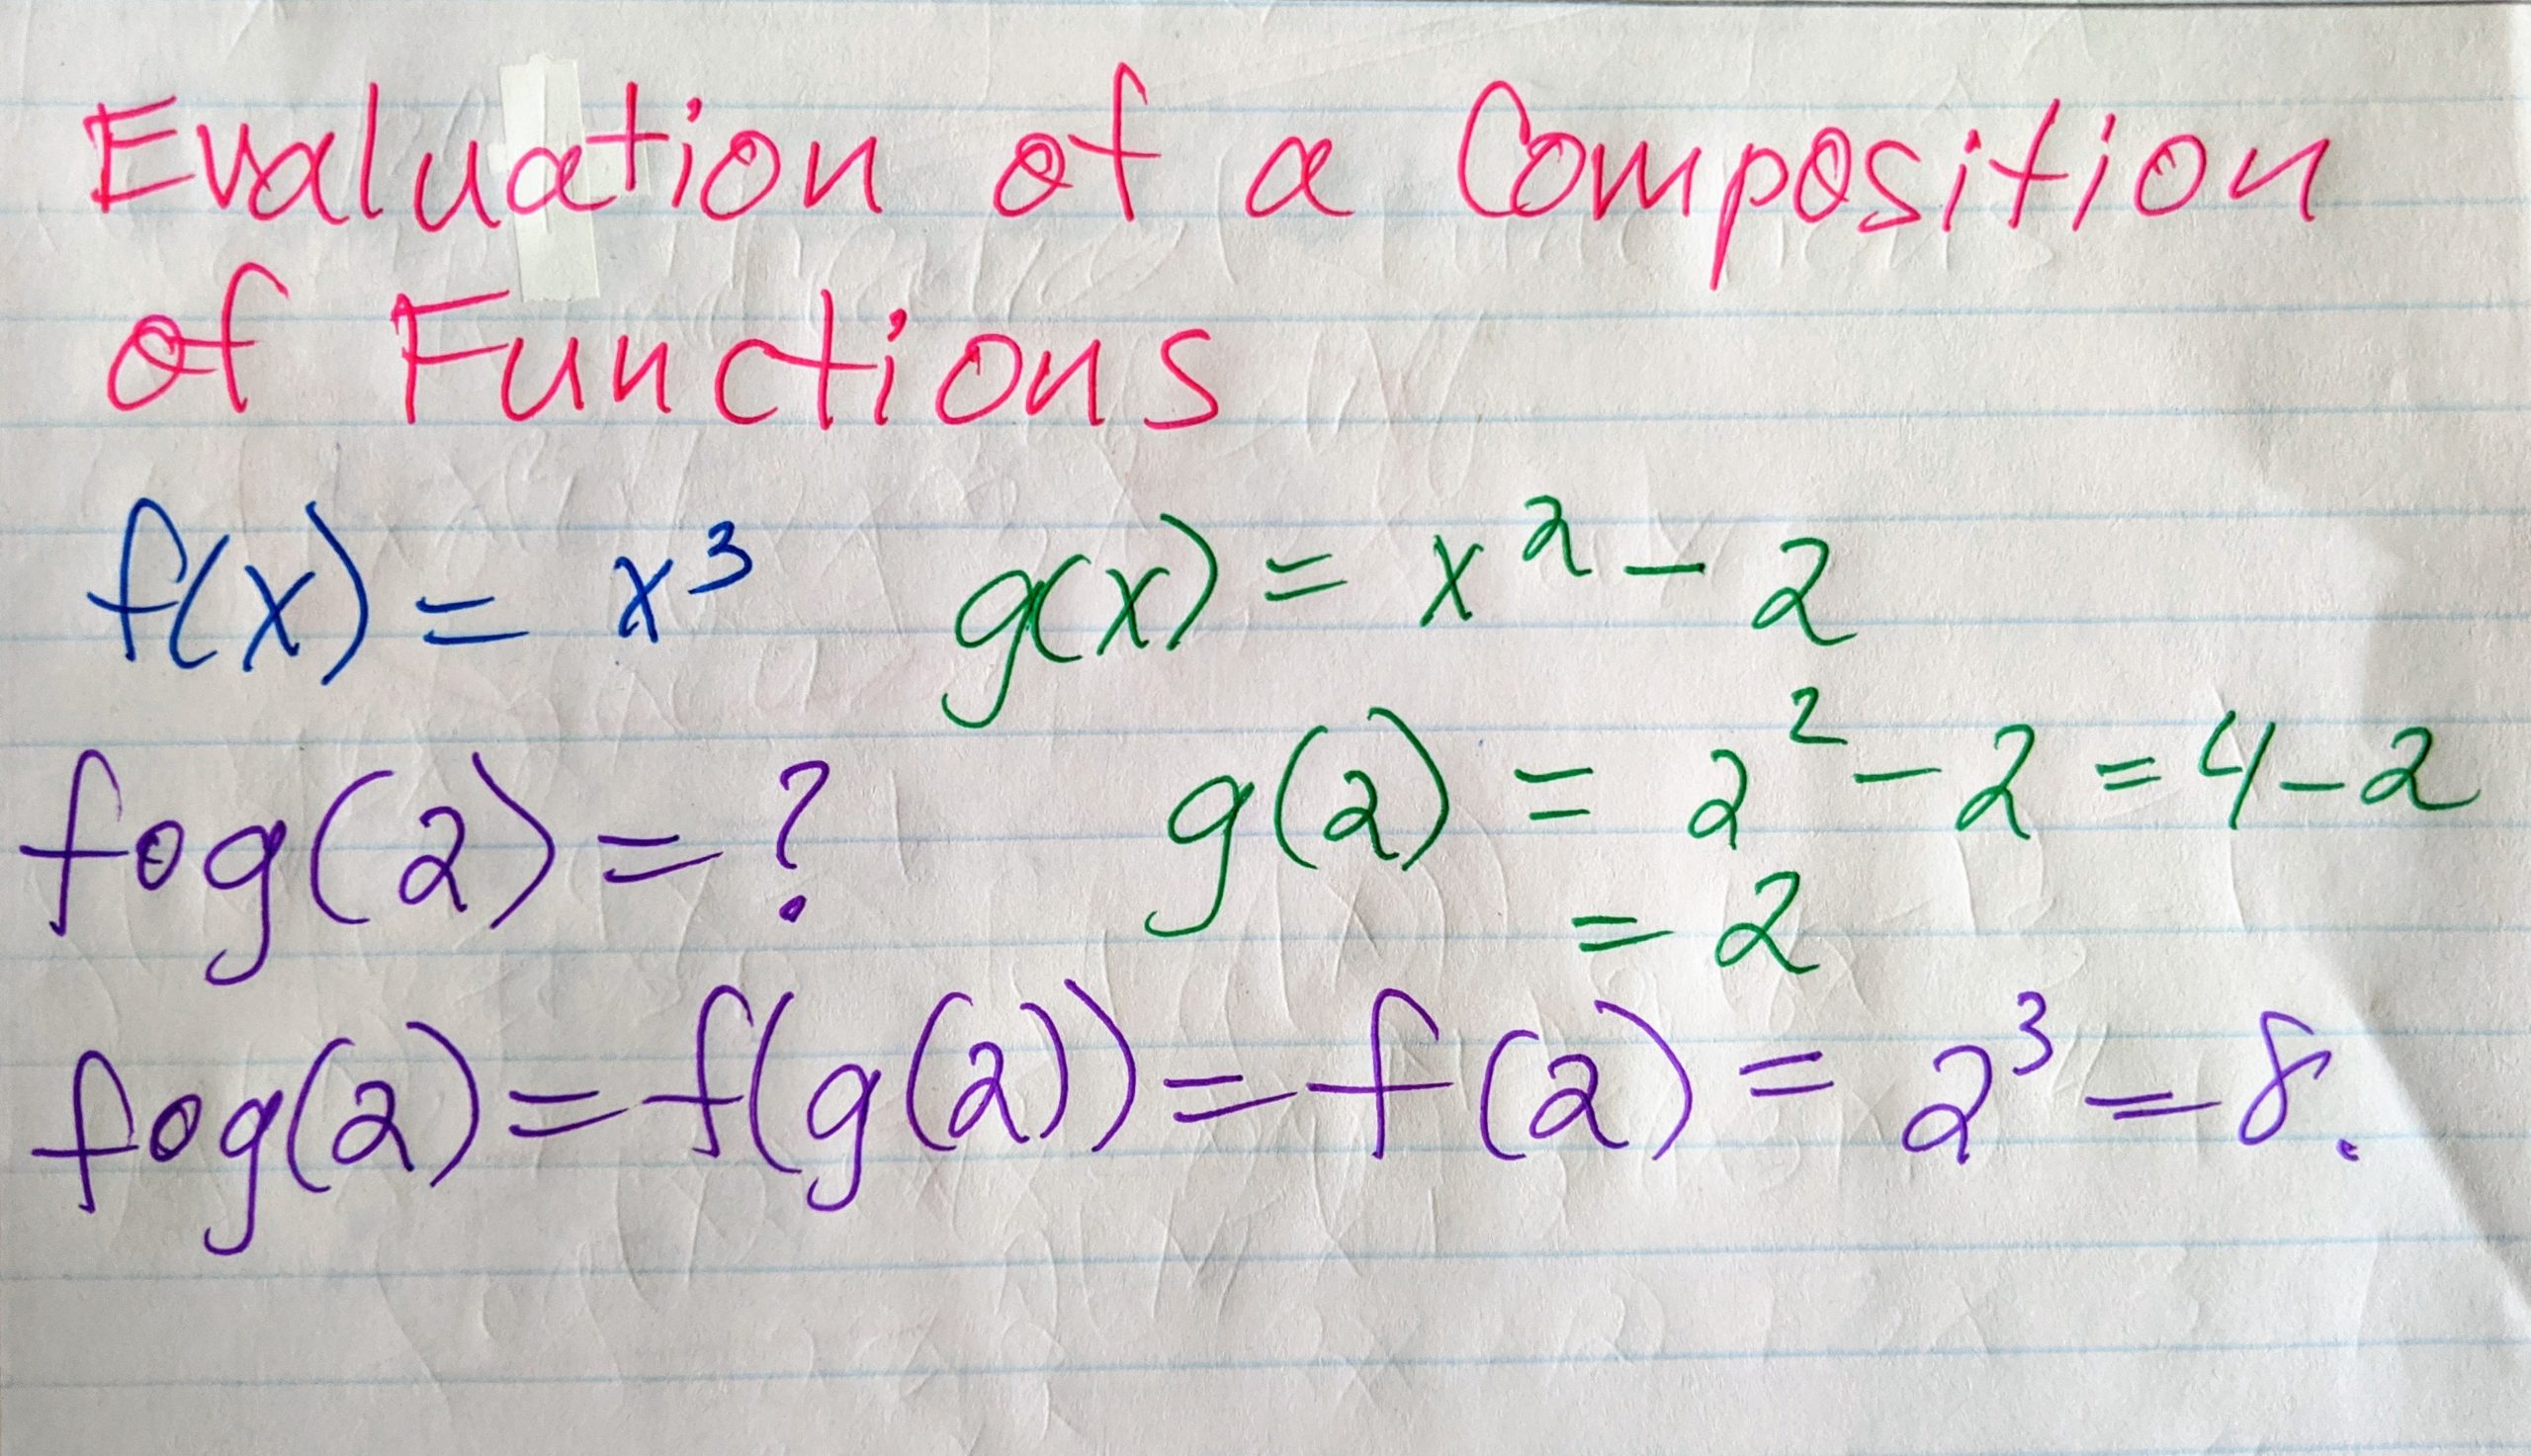 evaluation-of-the-composition-of-functions-math-worksheets-math-videos-math-ottawa-toronto